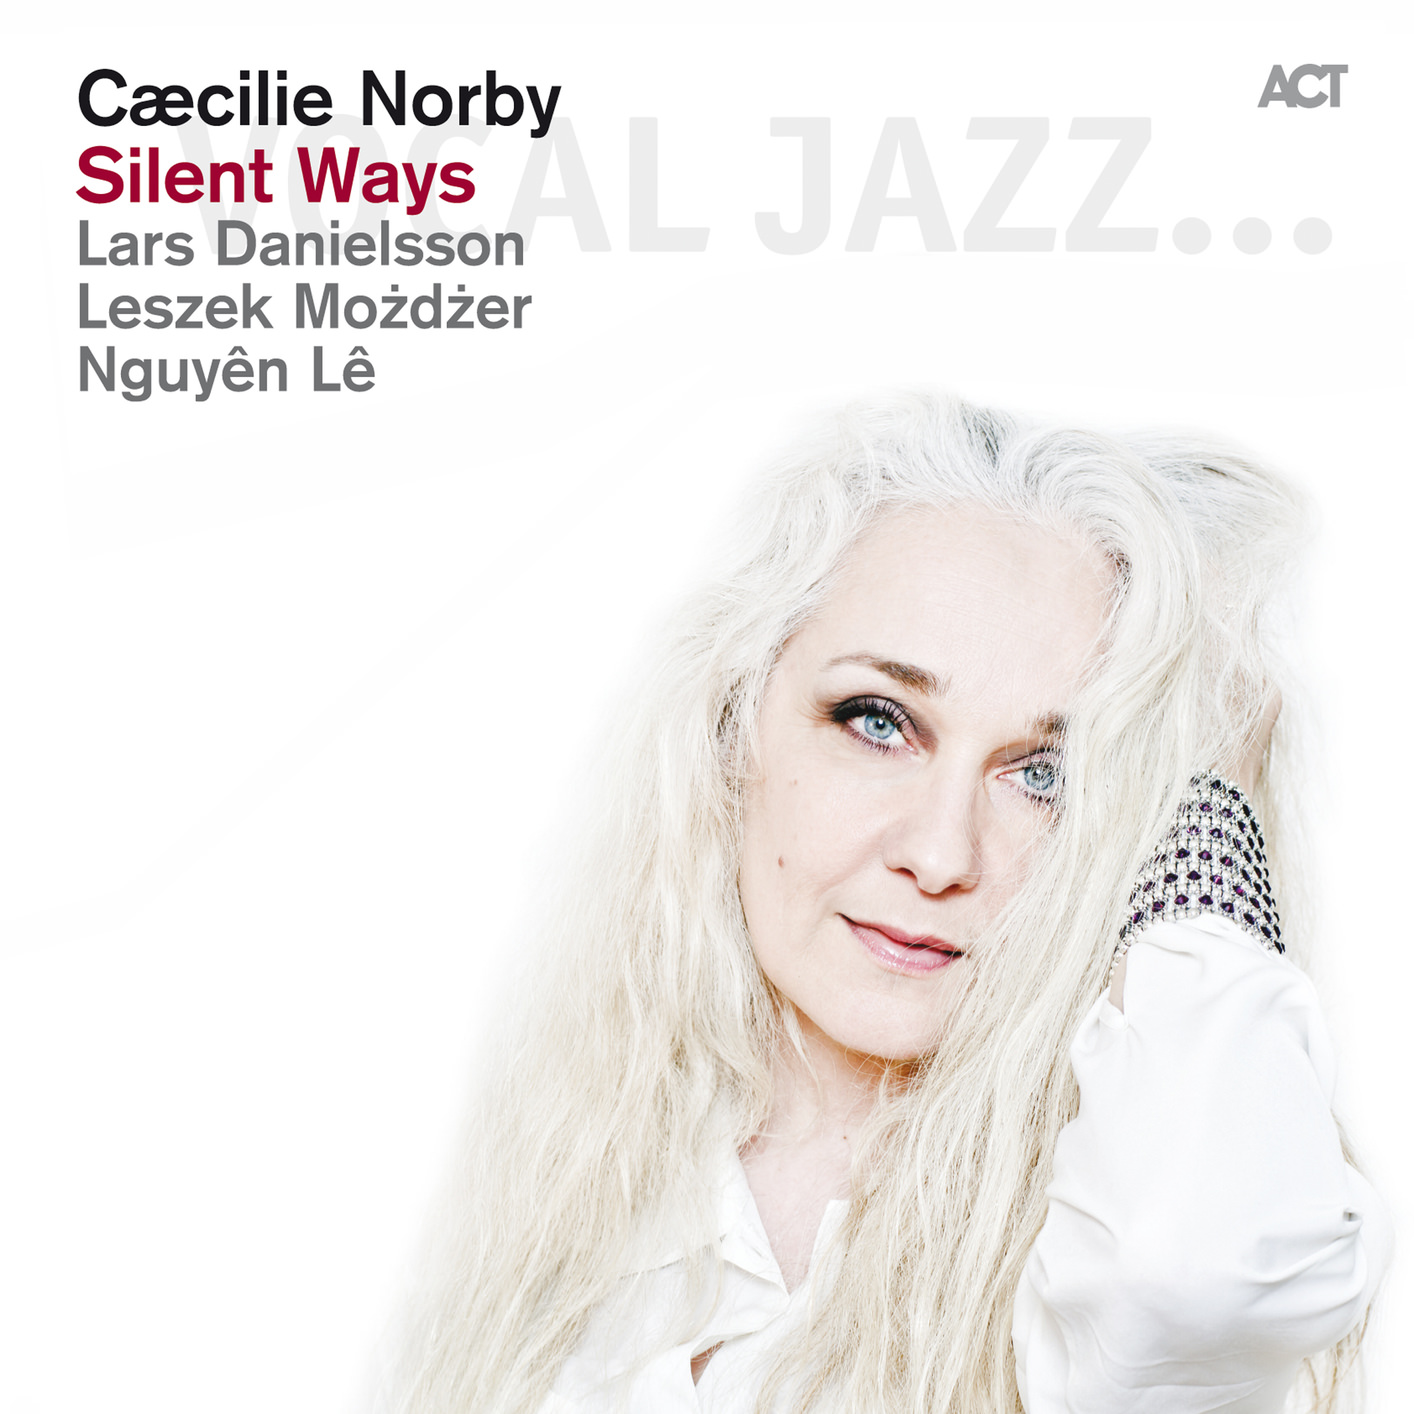 Caecilie Norby - Silent Ways (2013/2014) [ProStudioMasters FLAC 24bit/96kHz]